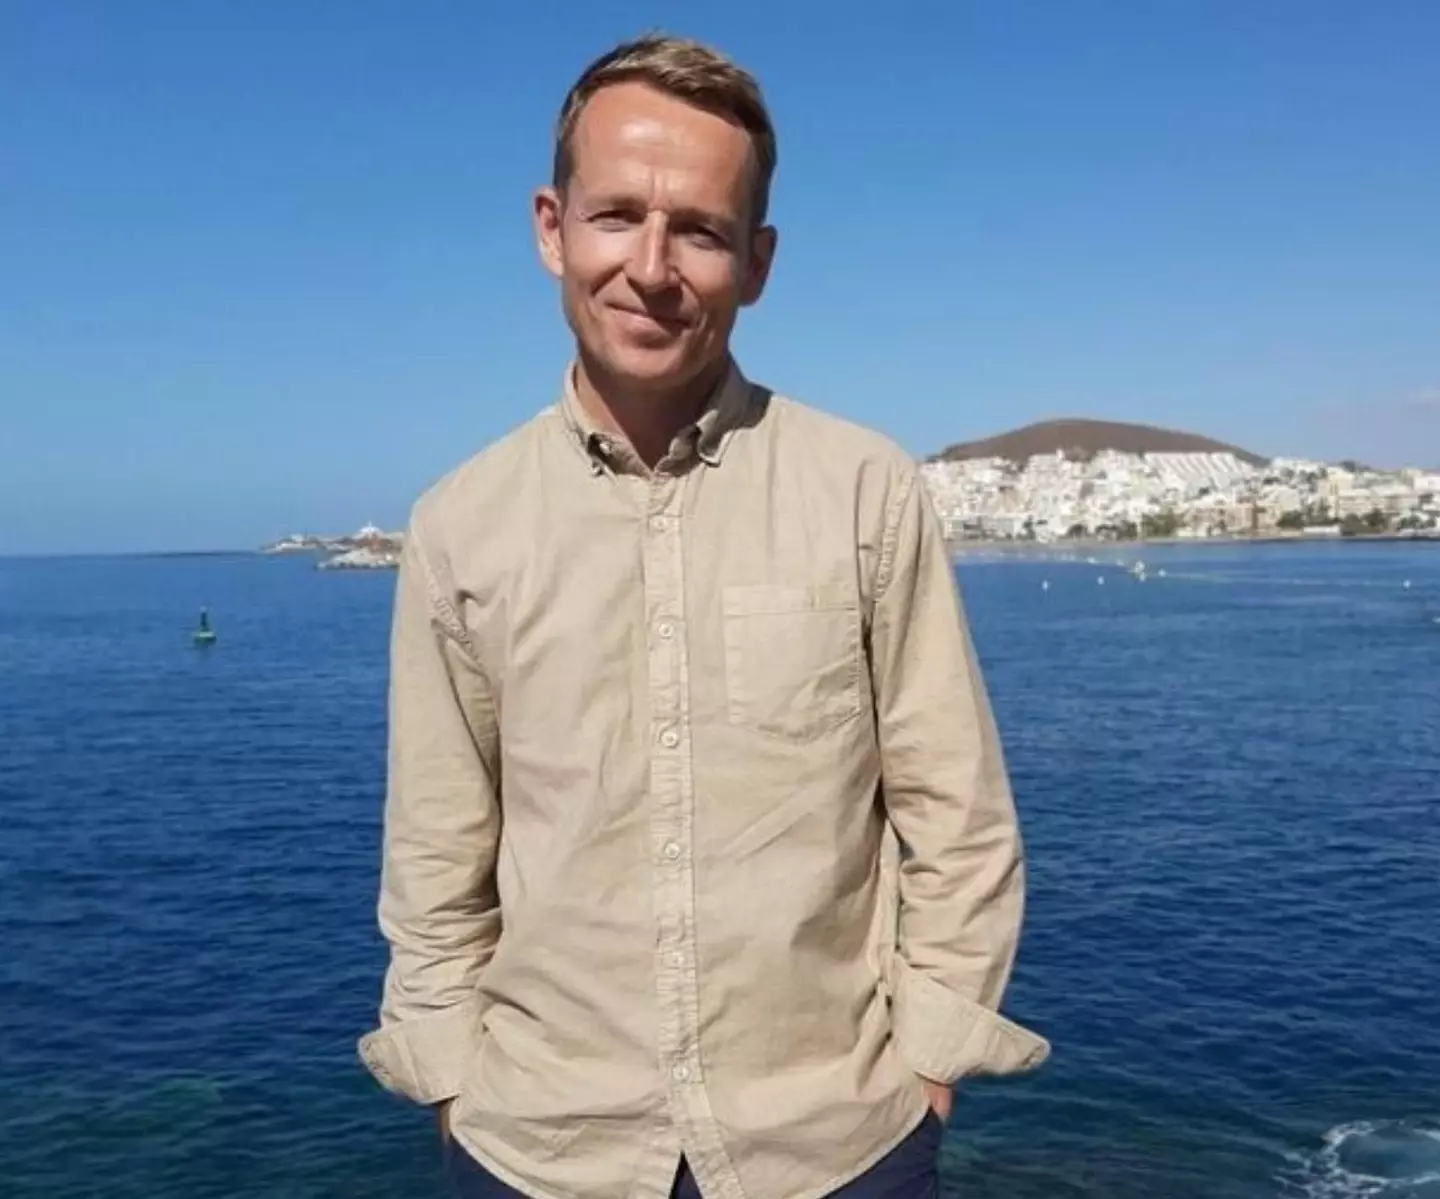 Jonnie Irwin is best known for presenting A Place In The Sun and Escape To The Country.